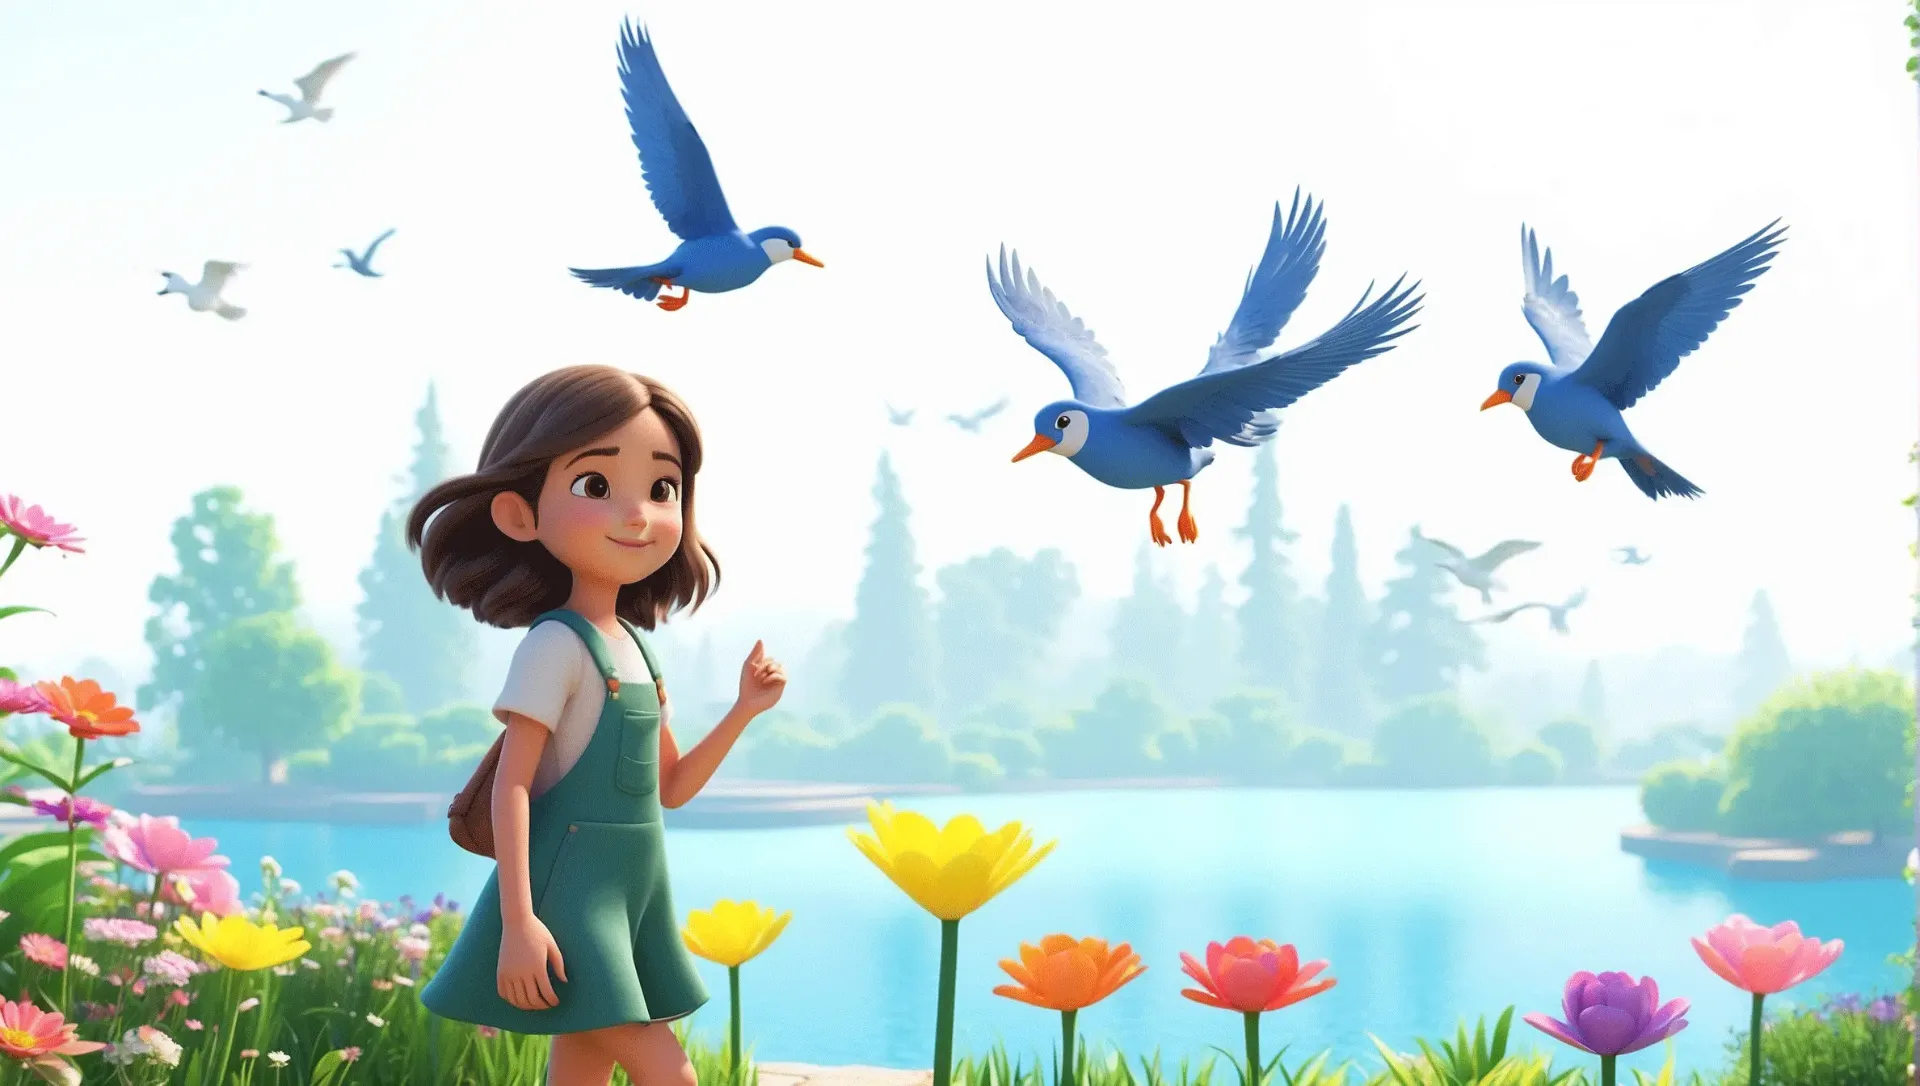 Cute Girl at Park Playing with Birds 3D Character Artwork Illustration image